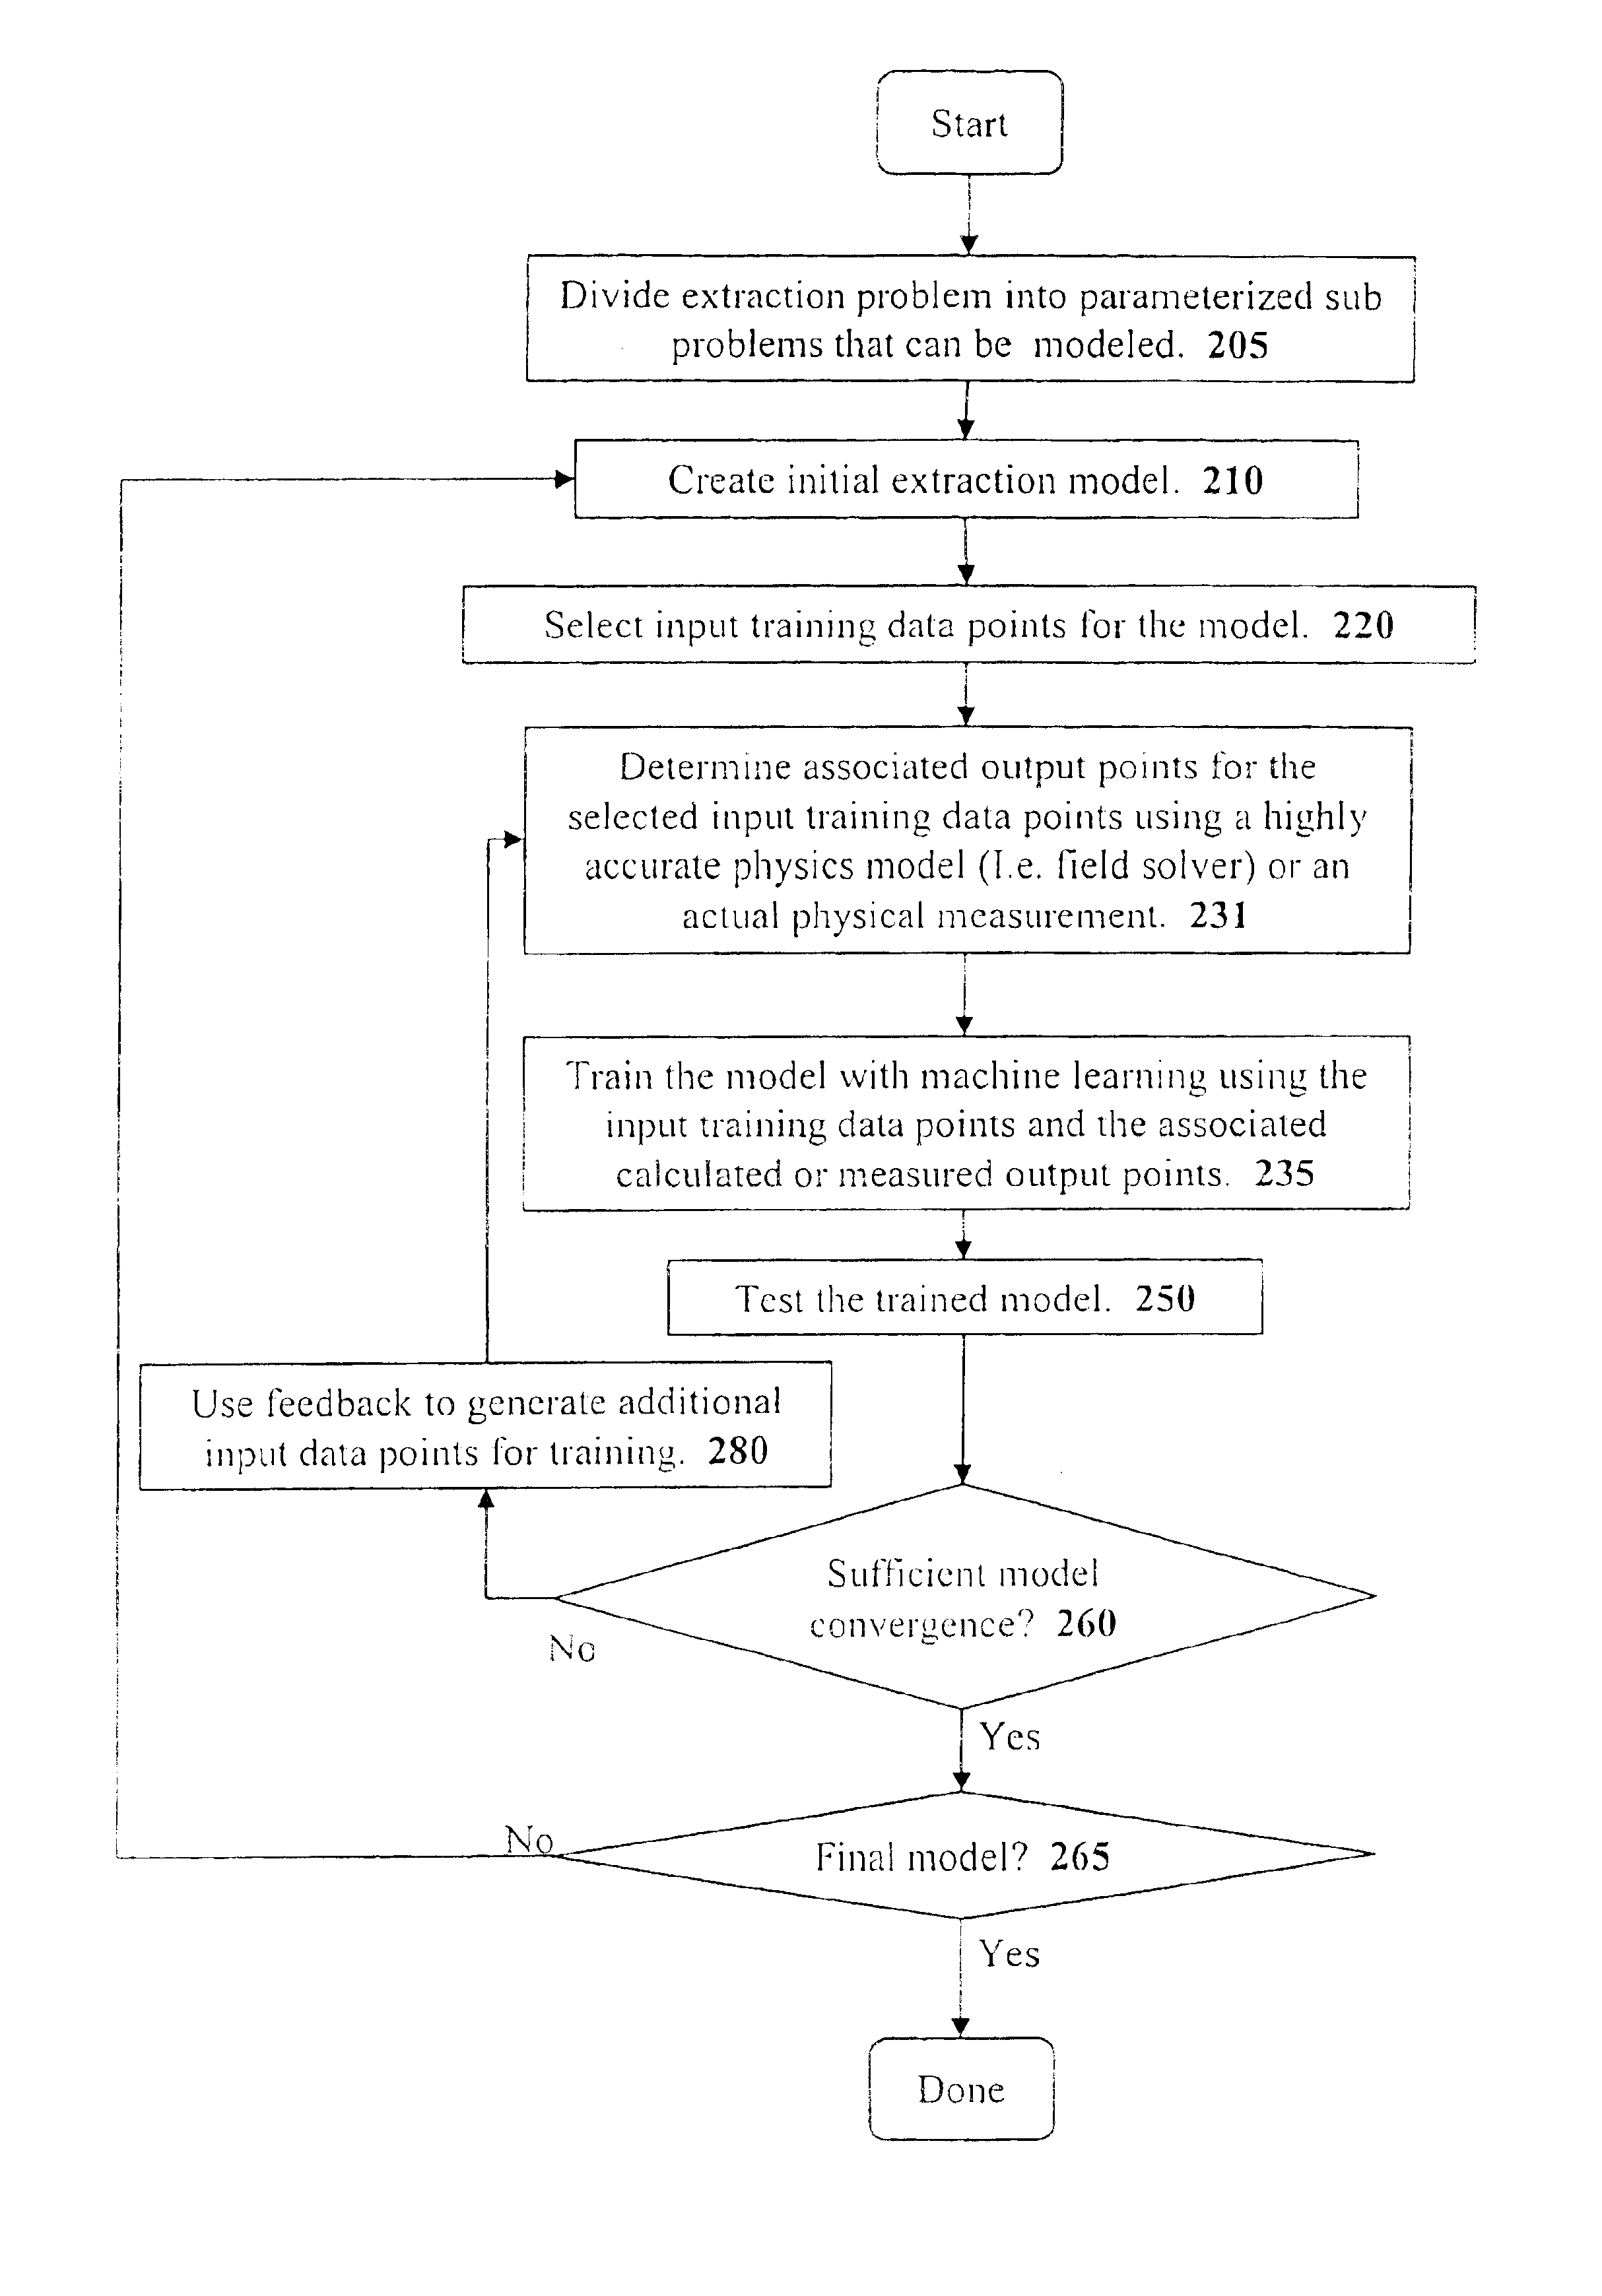 Method and apparatus for performing extraction using machine learning